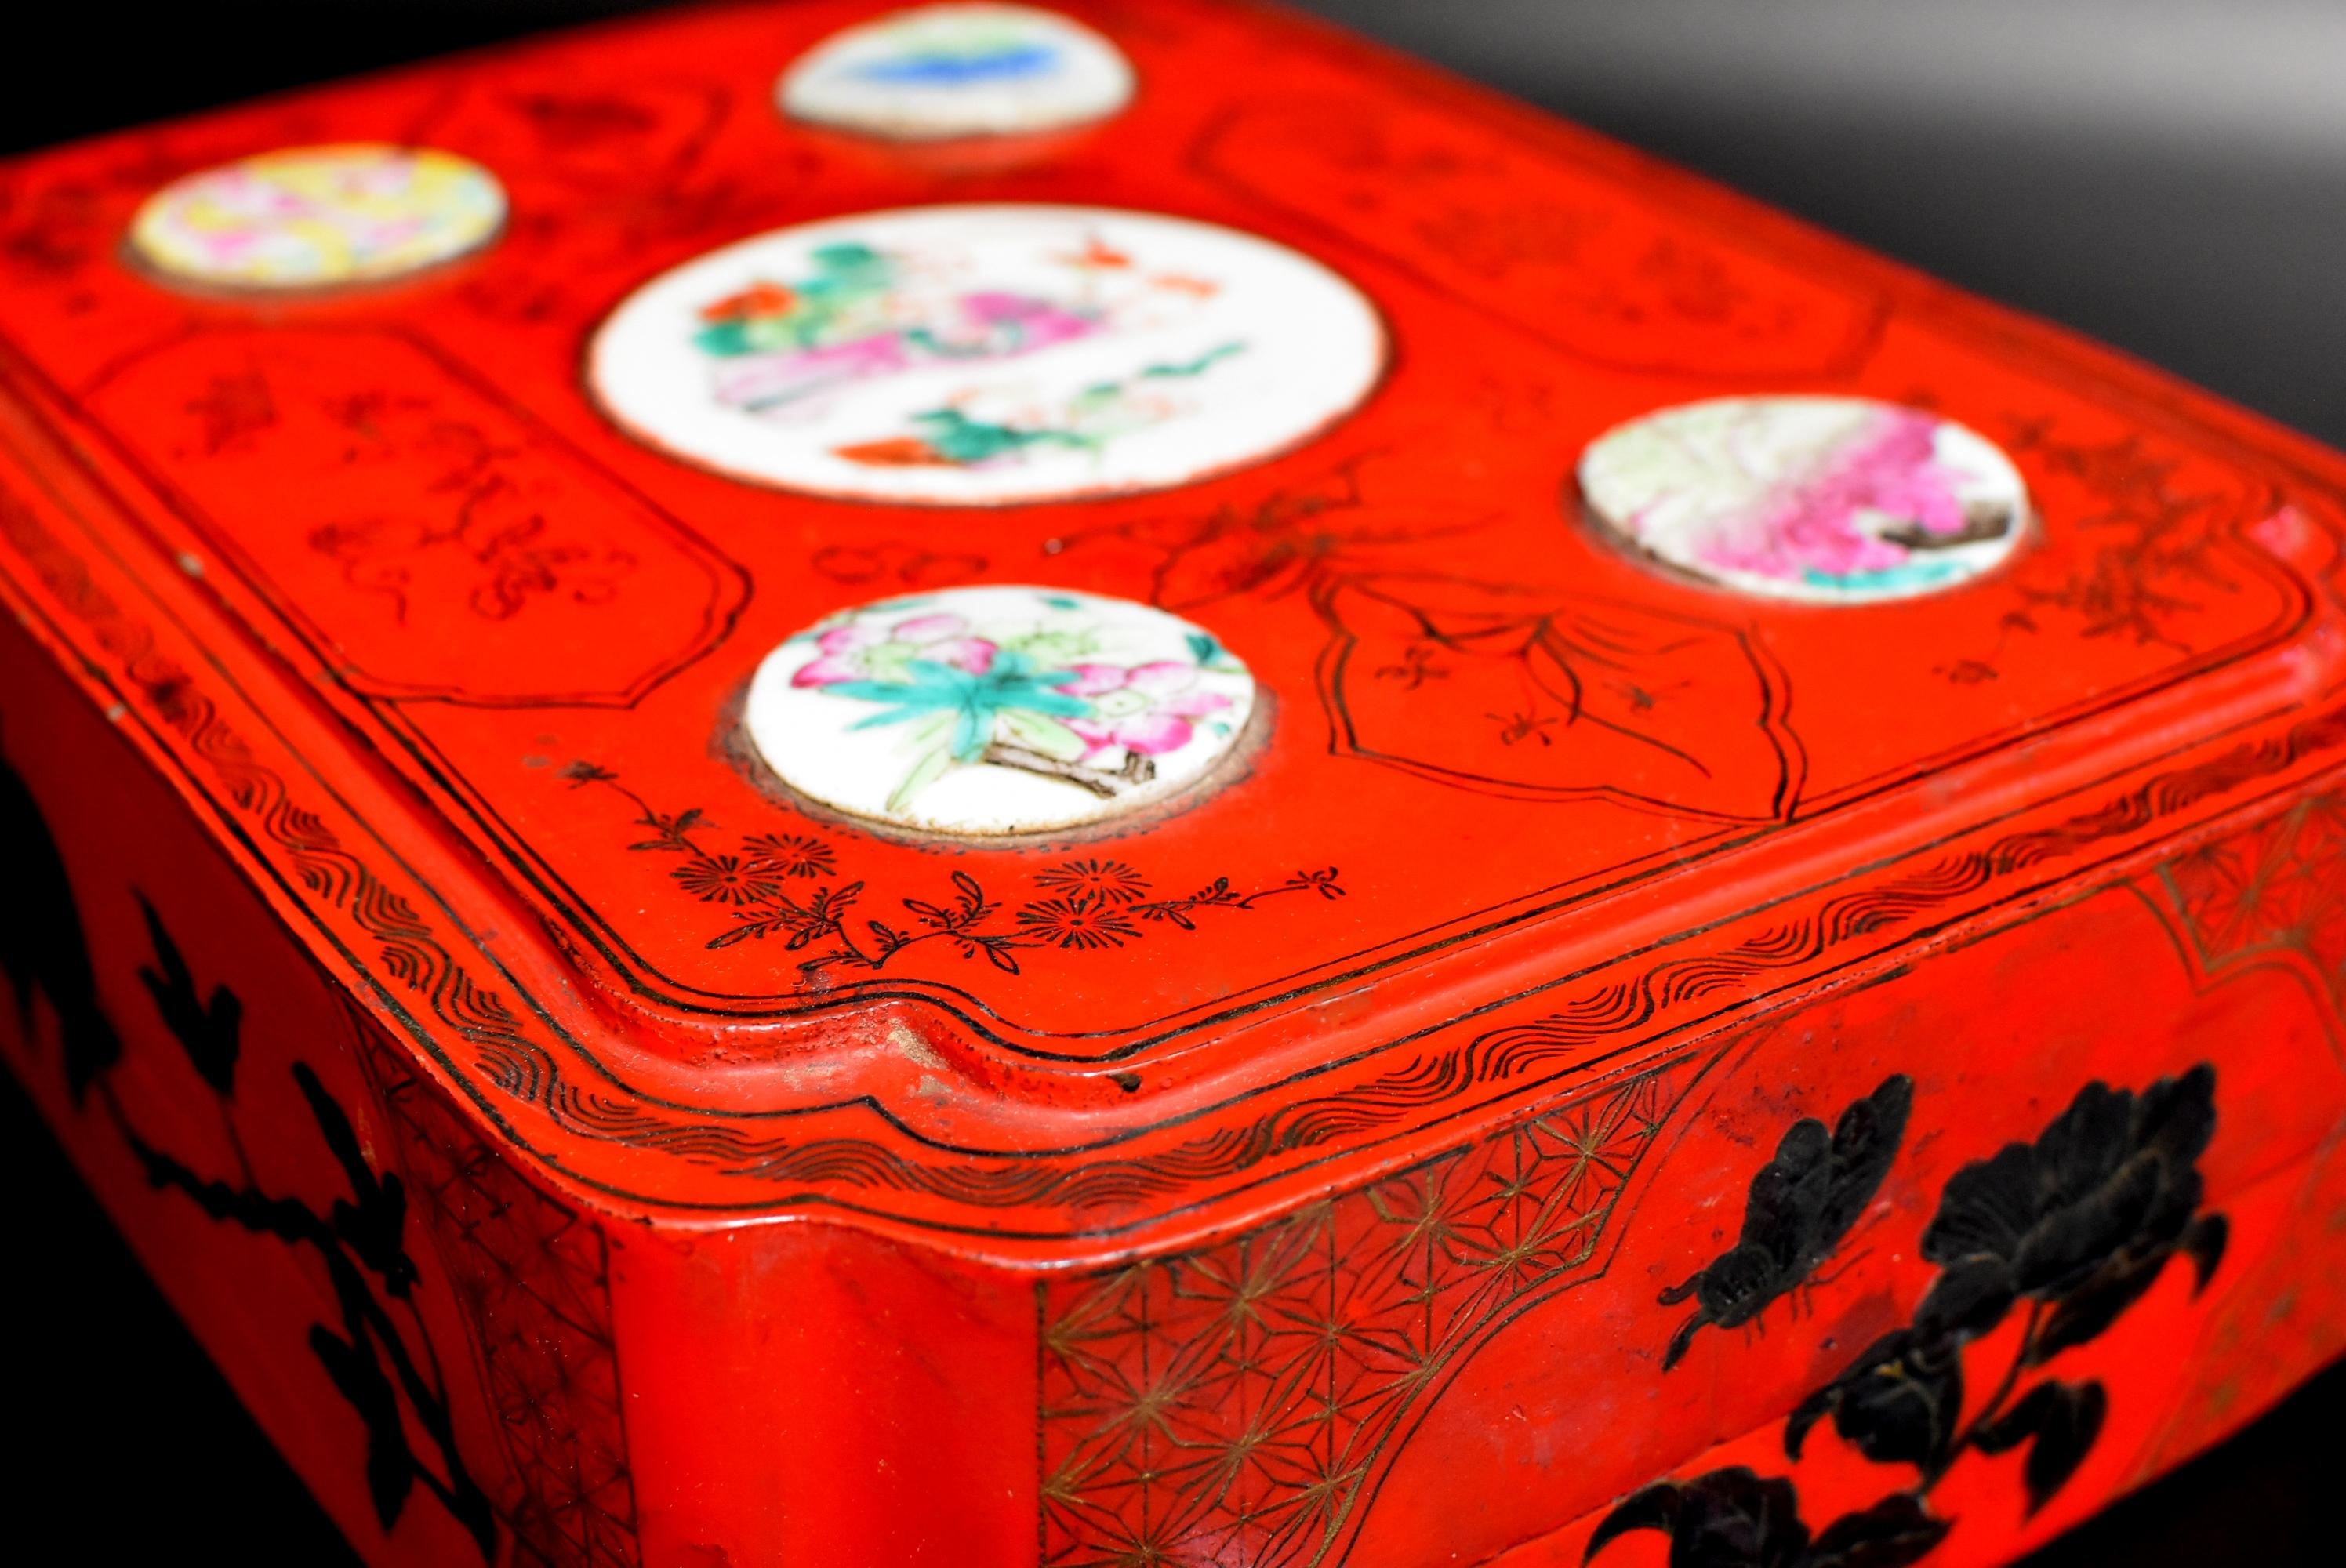 Vintage Red Lacquered Chinese Box with Antique Porcelains 15